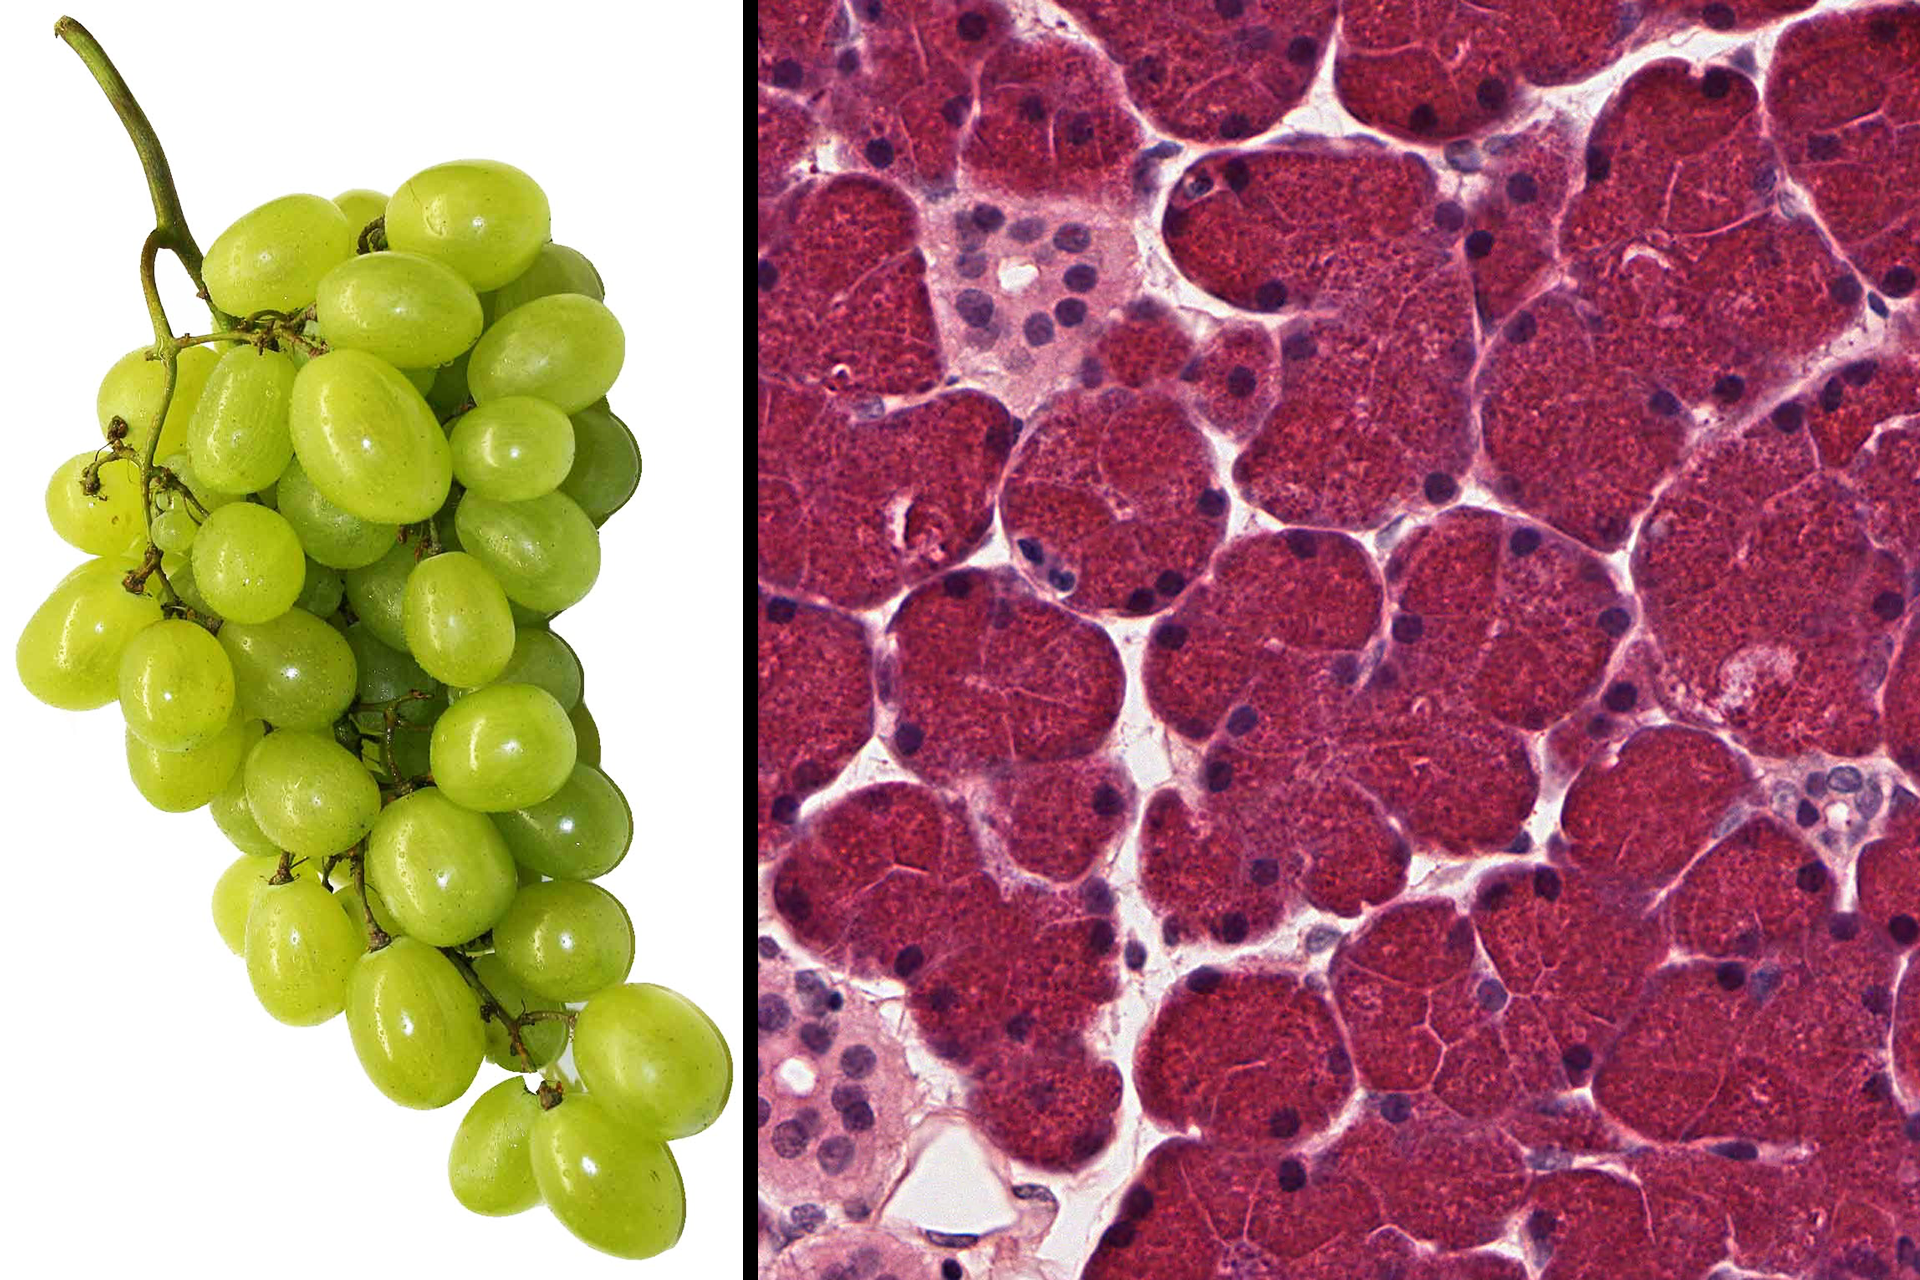 Structure of compound acinar gland > <p>The structure of a compound acinar gland is analogous to the organization of a bunch of grapes.  Each bunch represents a lobule with individual grapes corresponding to acini.  Smaller stems connecting to the grapes denote intralobular ducts with the larger stems representing the interlobular duct.  It’s helpful to keep this similarity in mind when interpreting tissue sections of compound glands.</p>
